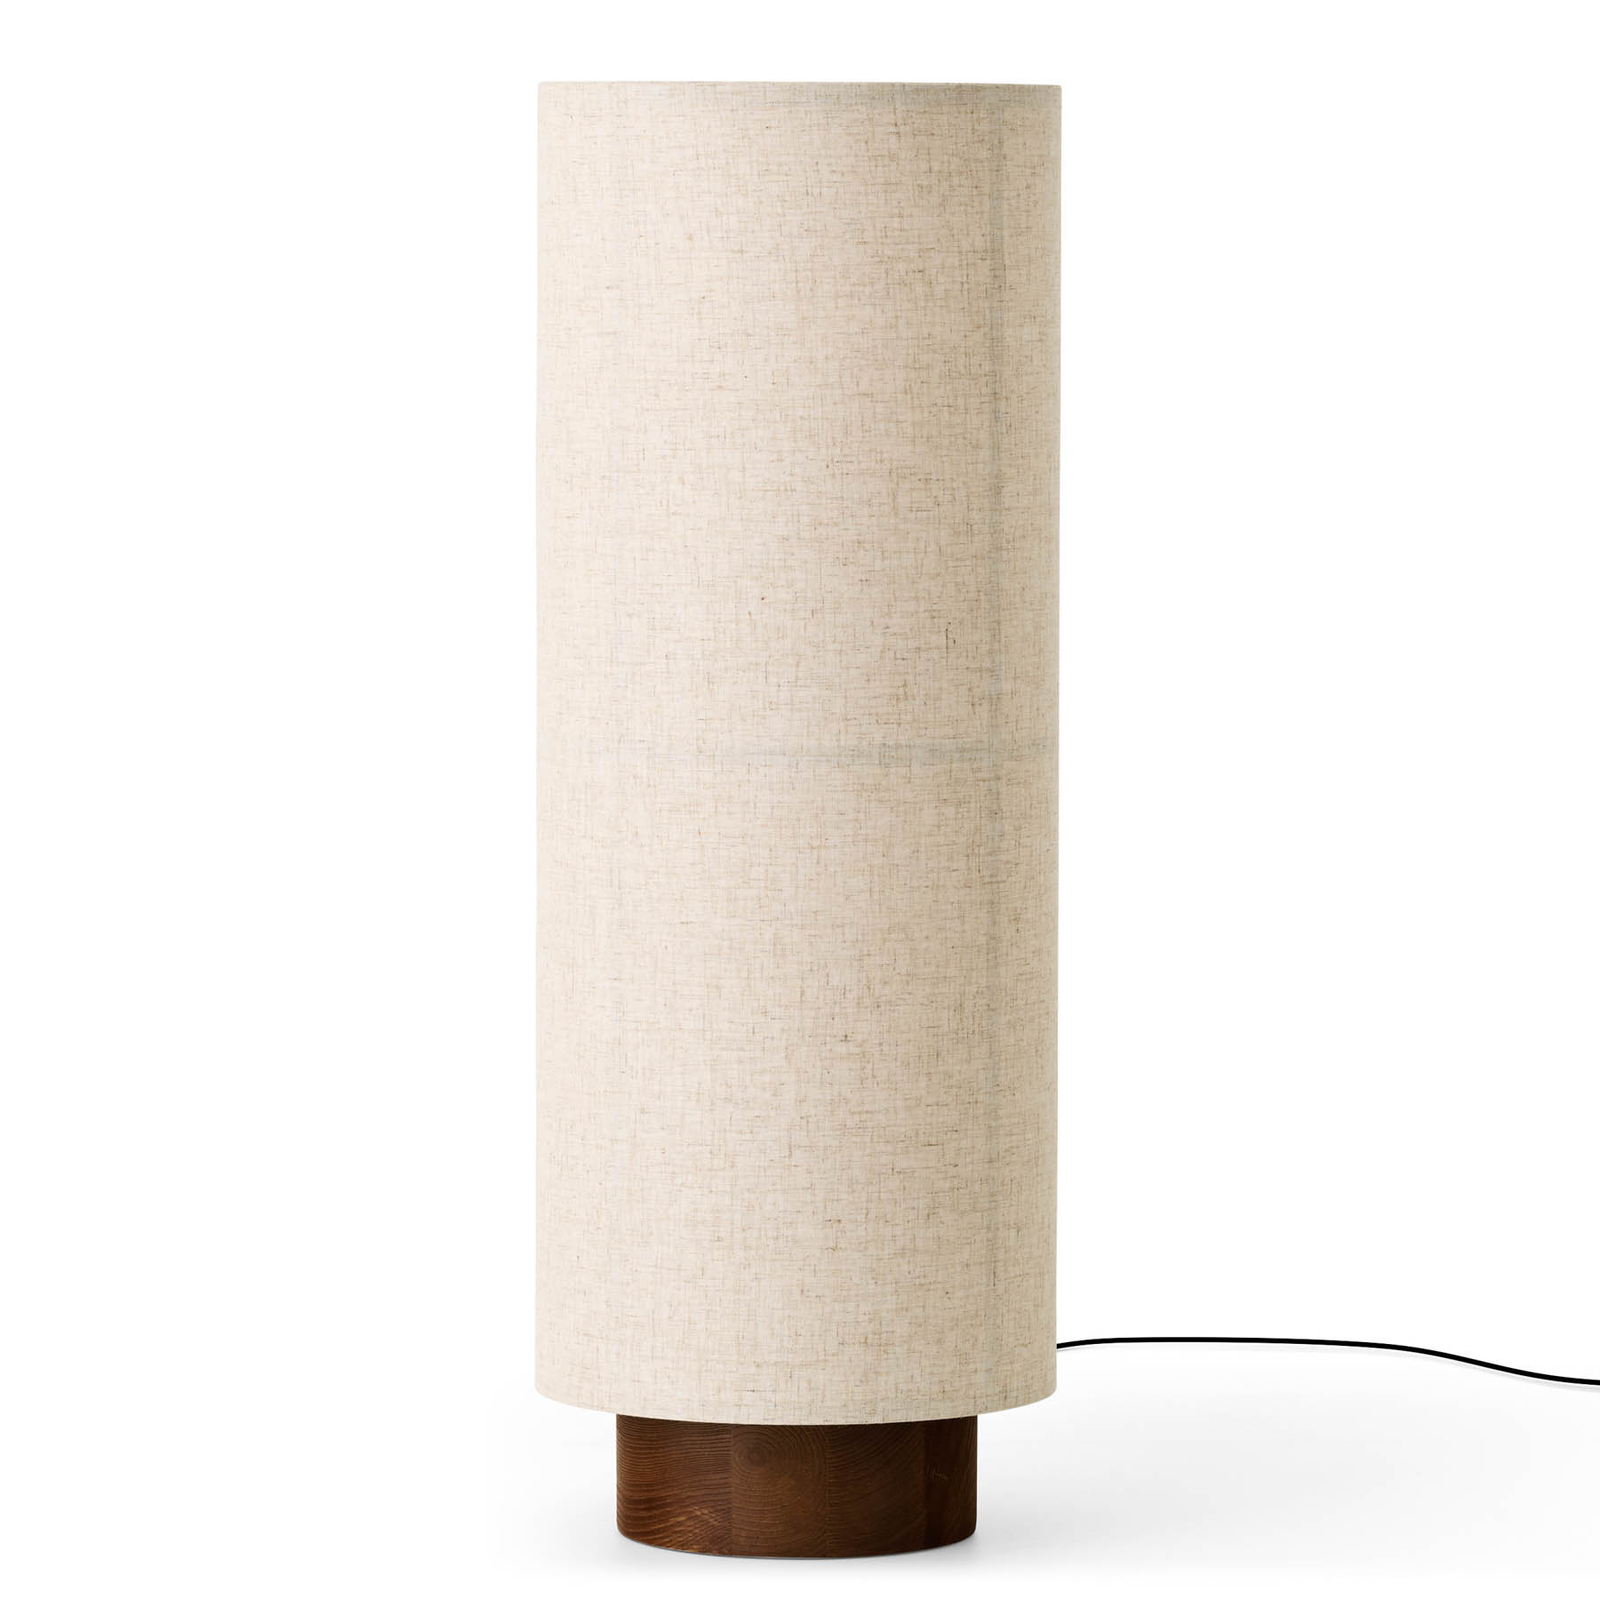 Audo Hashira floor lamp with a dimmer, natural